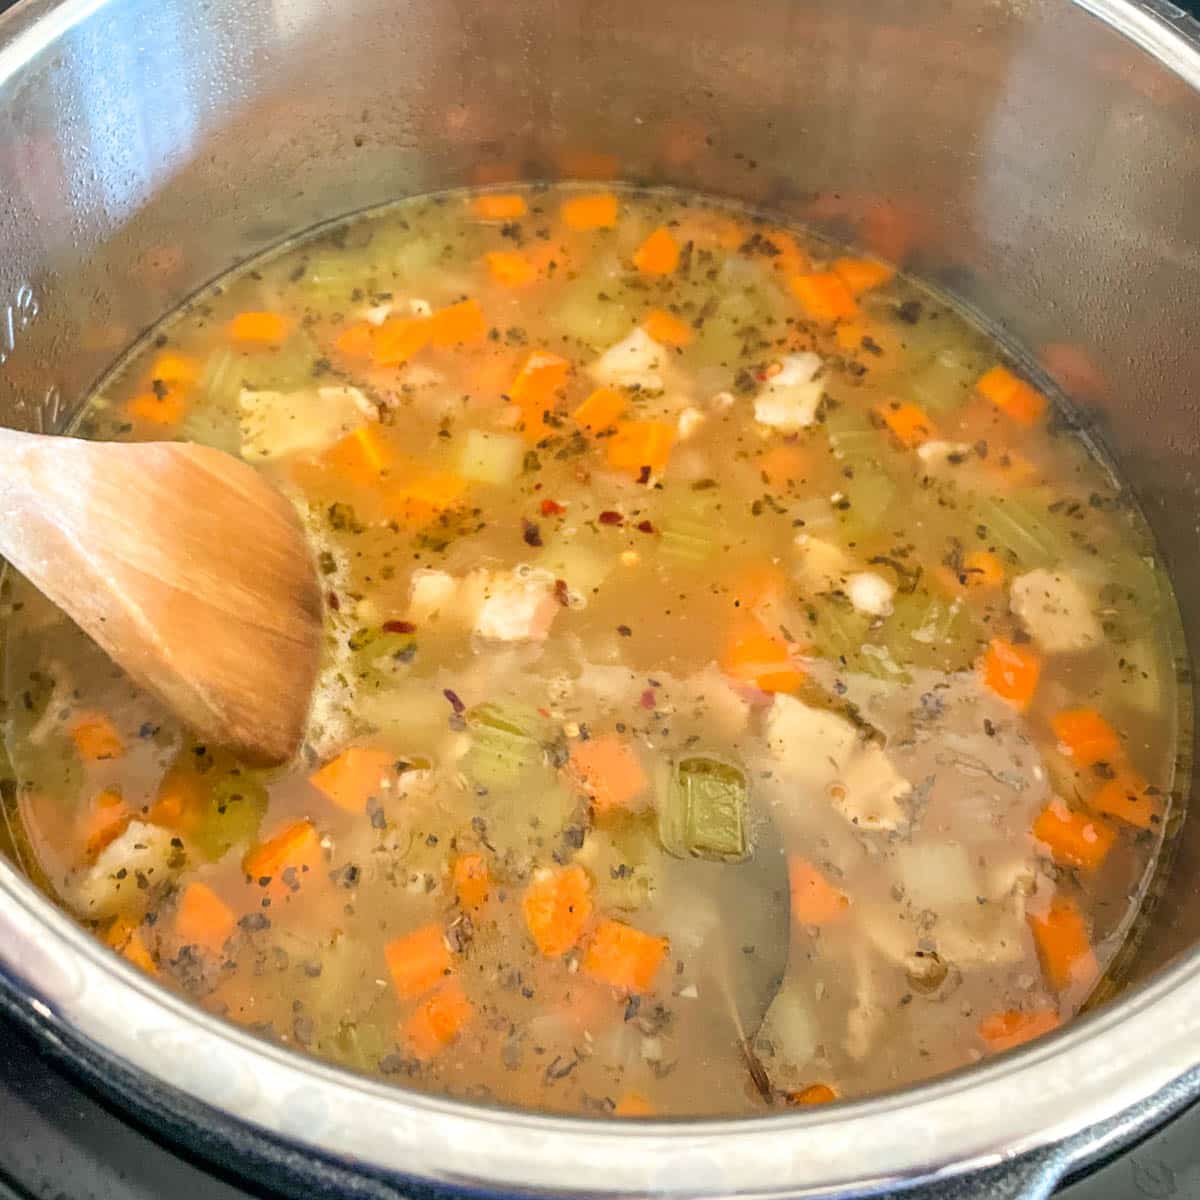 Beans and broth are added to the Instant Pot.